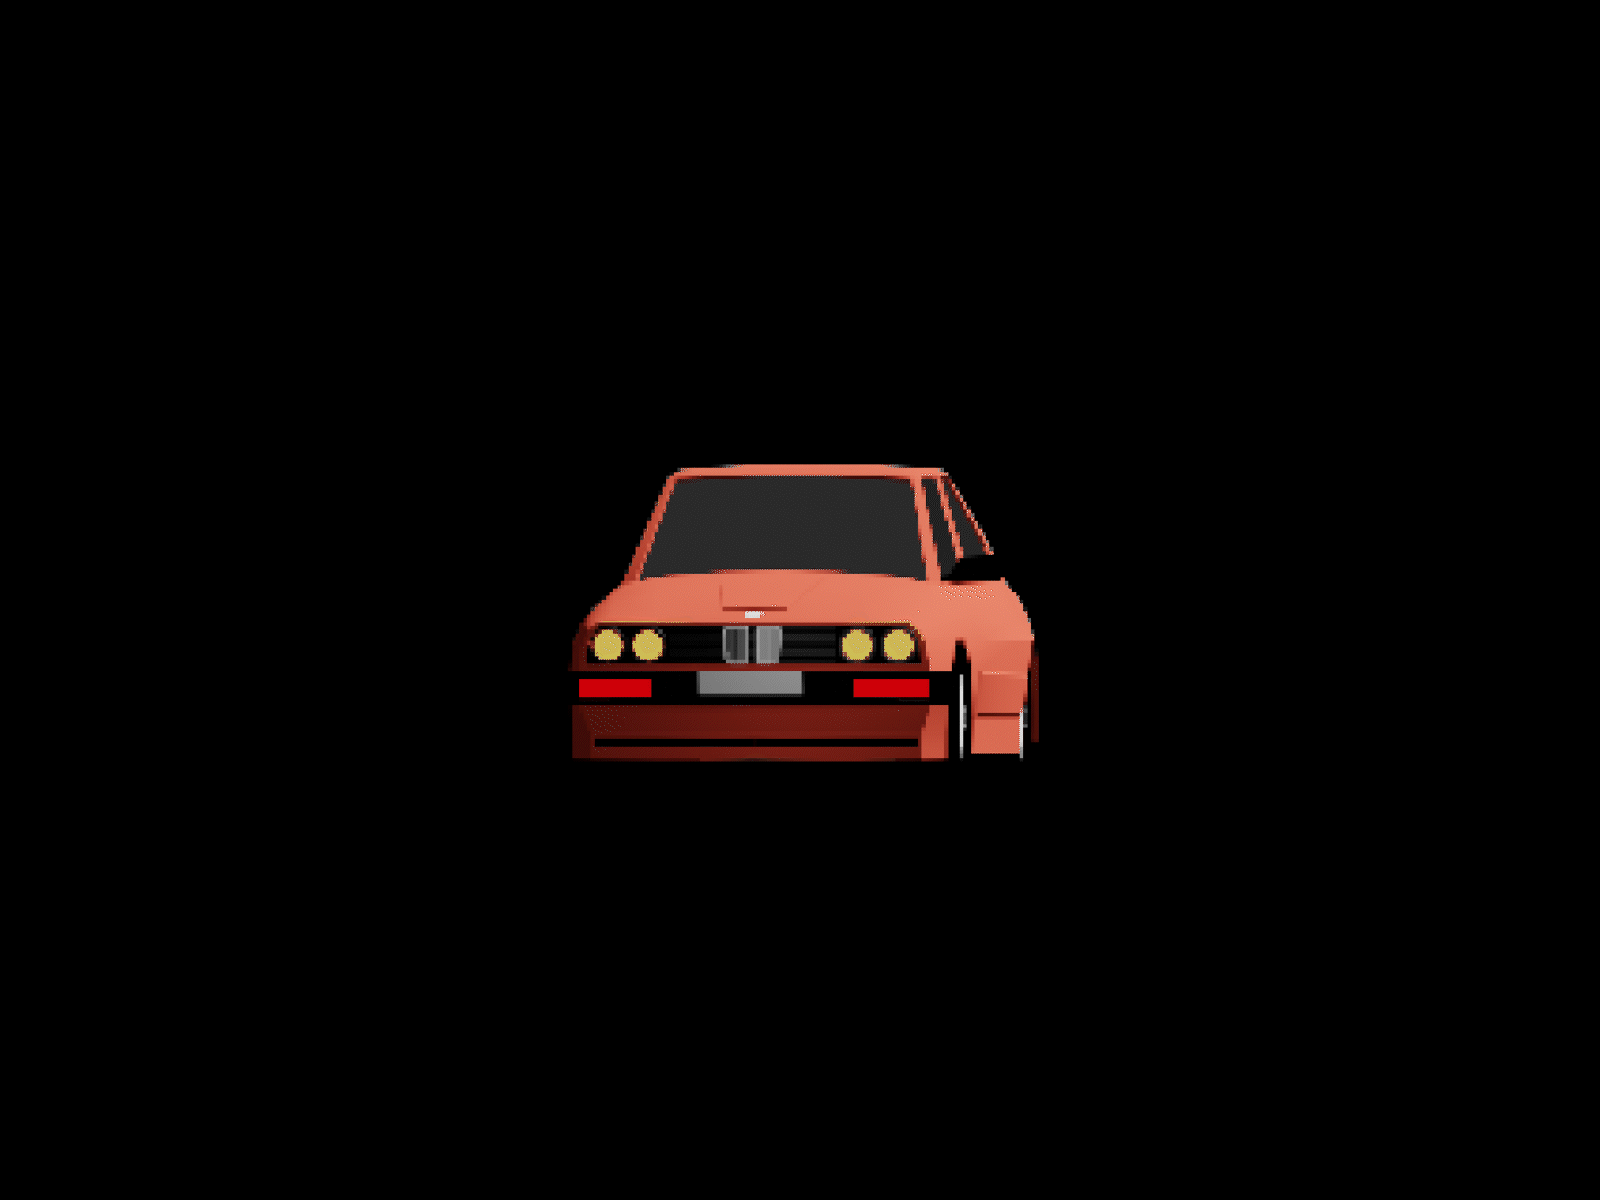 #135 8bit aAnimation by Blender3D / First experience / BMW E30